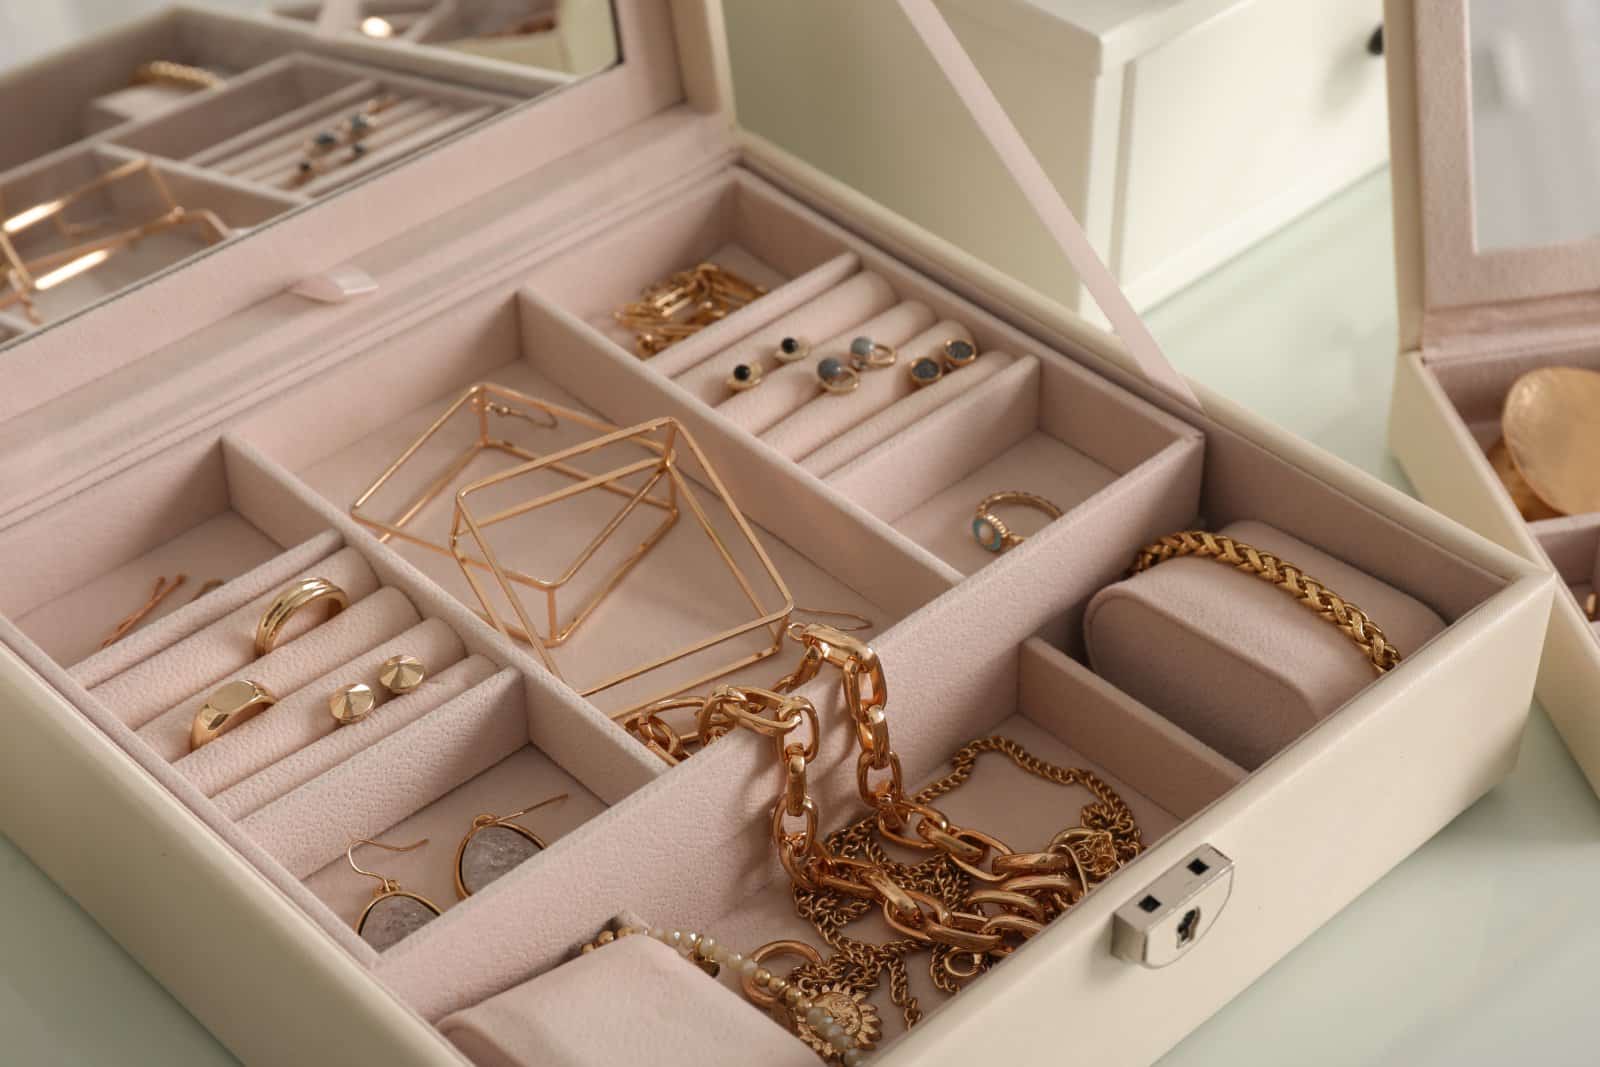 <p class="wp-caption-text">Image Credit: Shutterstock / New Africa</p>  <p>A small jewelry organizer can prevent necklaces and earrings from getting tangled. Alternatively, thread necklaces through straws and clasp them to keep them neat.</p>